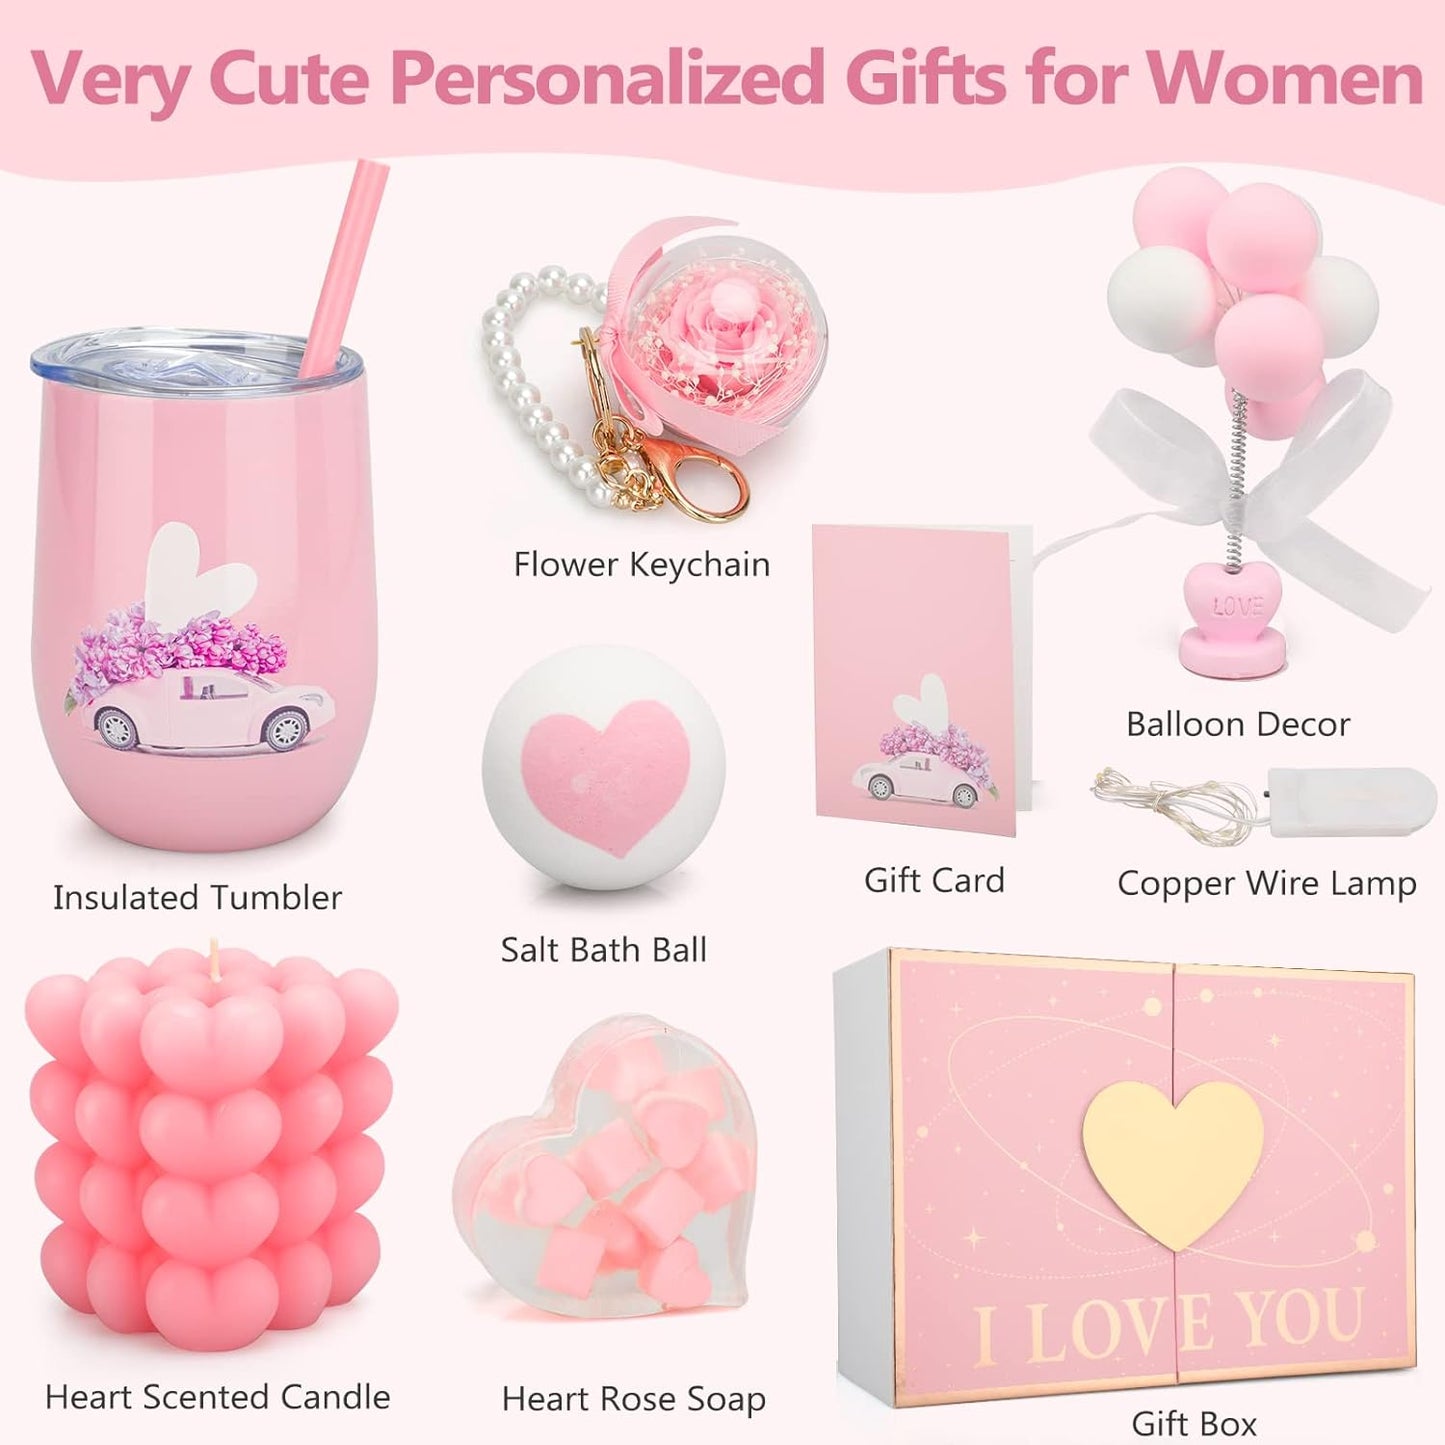 Birthday Gifts for Girlfriend, Cute Couple Gifts for Girlfriends - I Love You - Romantic Gifts for Her, Unique Gift Basket for Women, Mom, Sister, Friends,Love You Gifts for Mom from Daughter